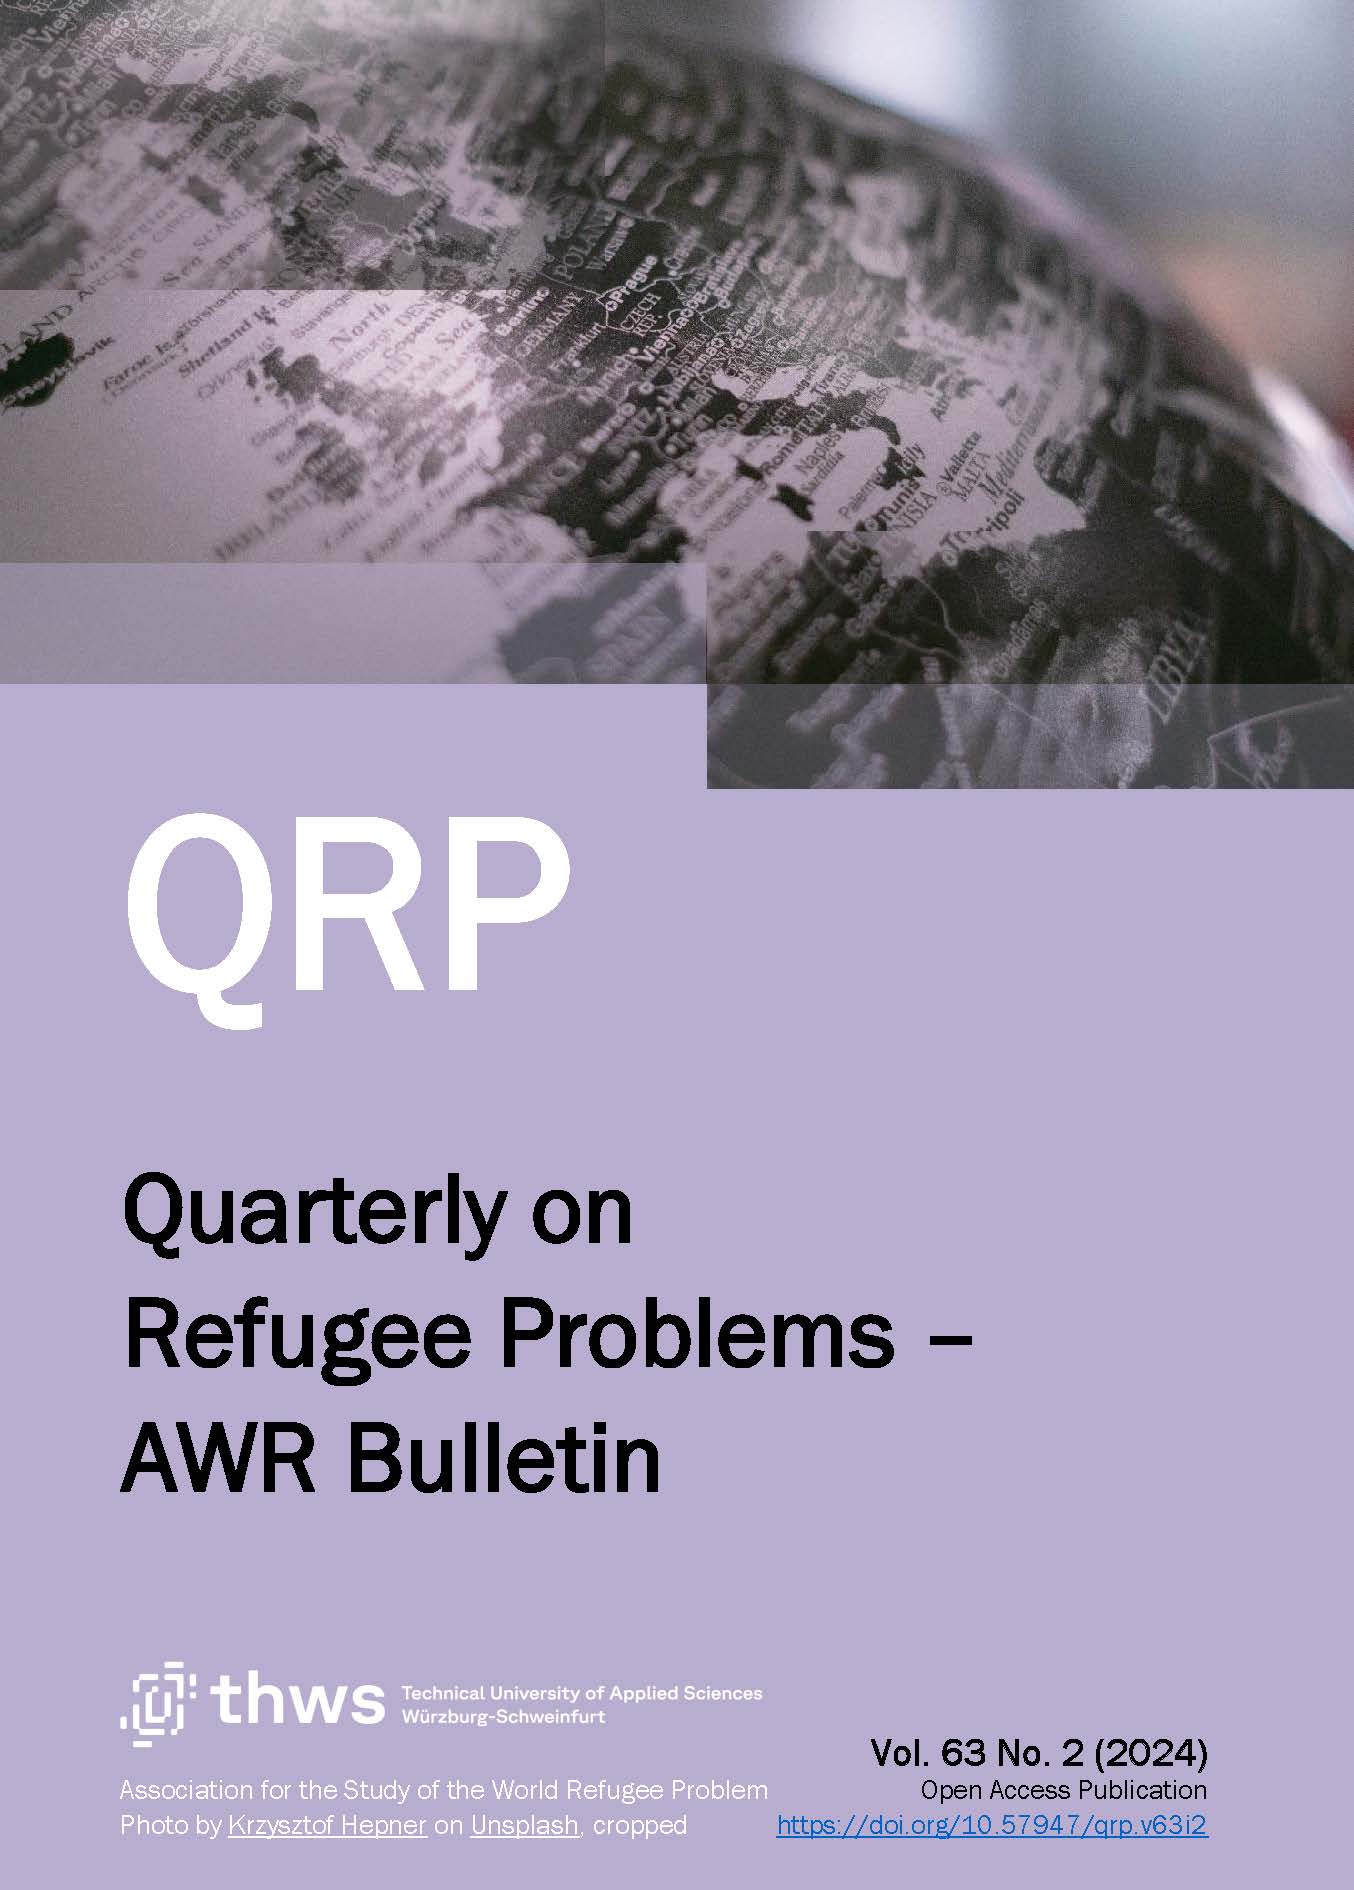 The cover of volume 63, issue 2, of the Quarterly on Refugee Problems - AWR Bulletin (QRP)